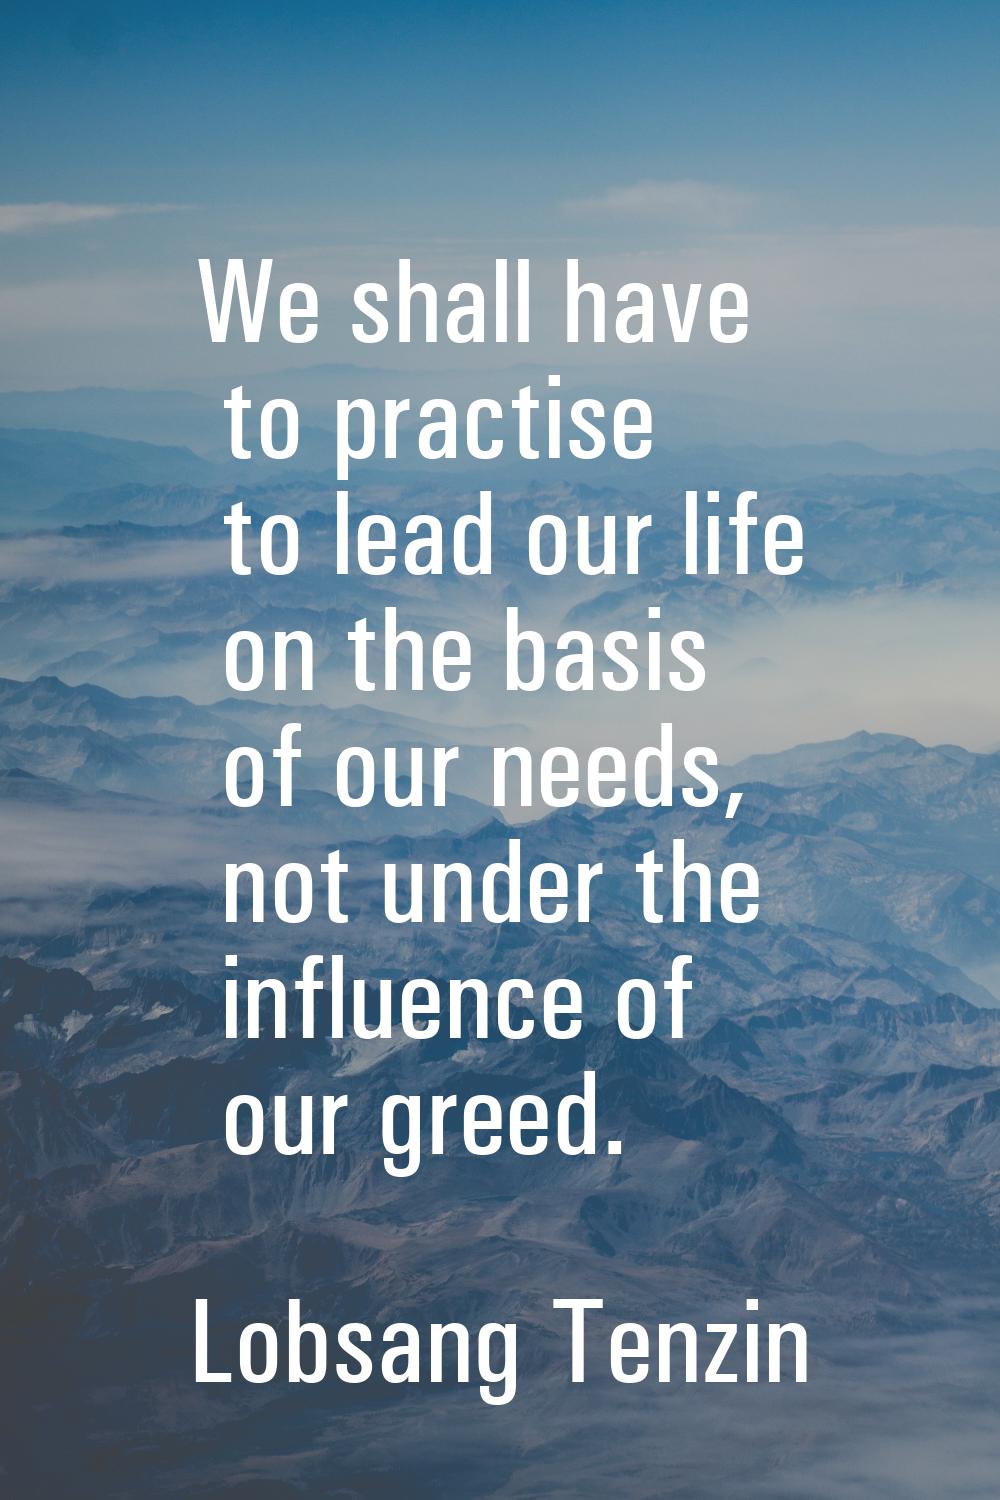 We shall have to practise to lead our life on the basis of our needs, not under the influence of ou